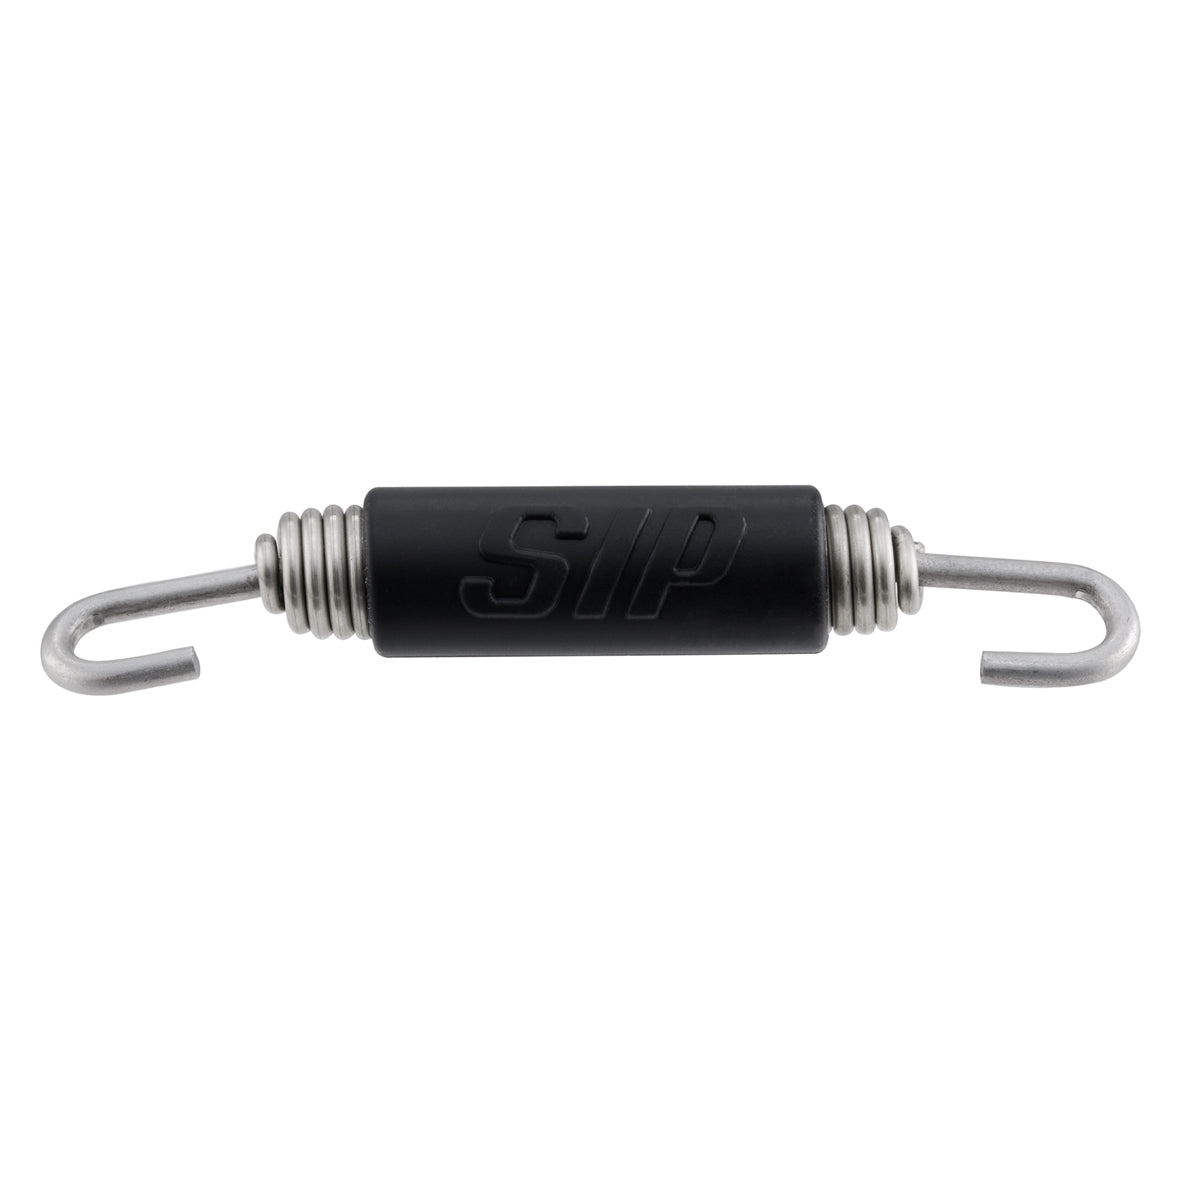 Vespa Lambretta SIP Exhaust Spring 80mm - Stainless Steel Rubber Coated